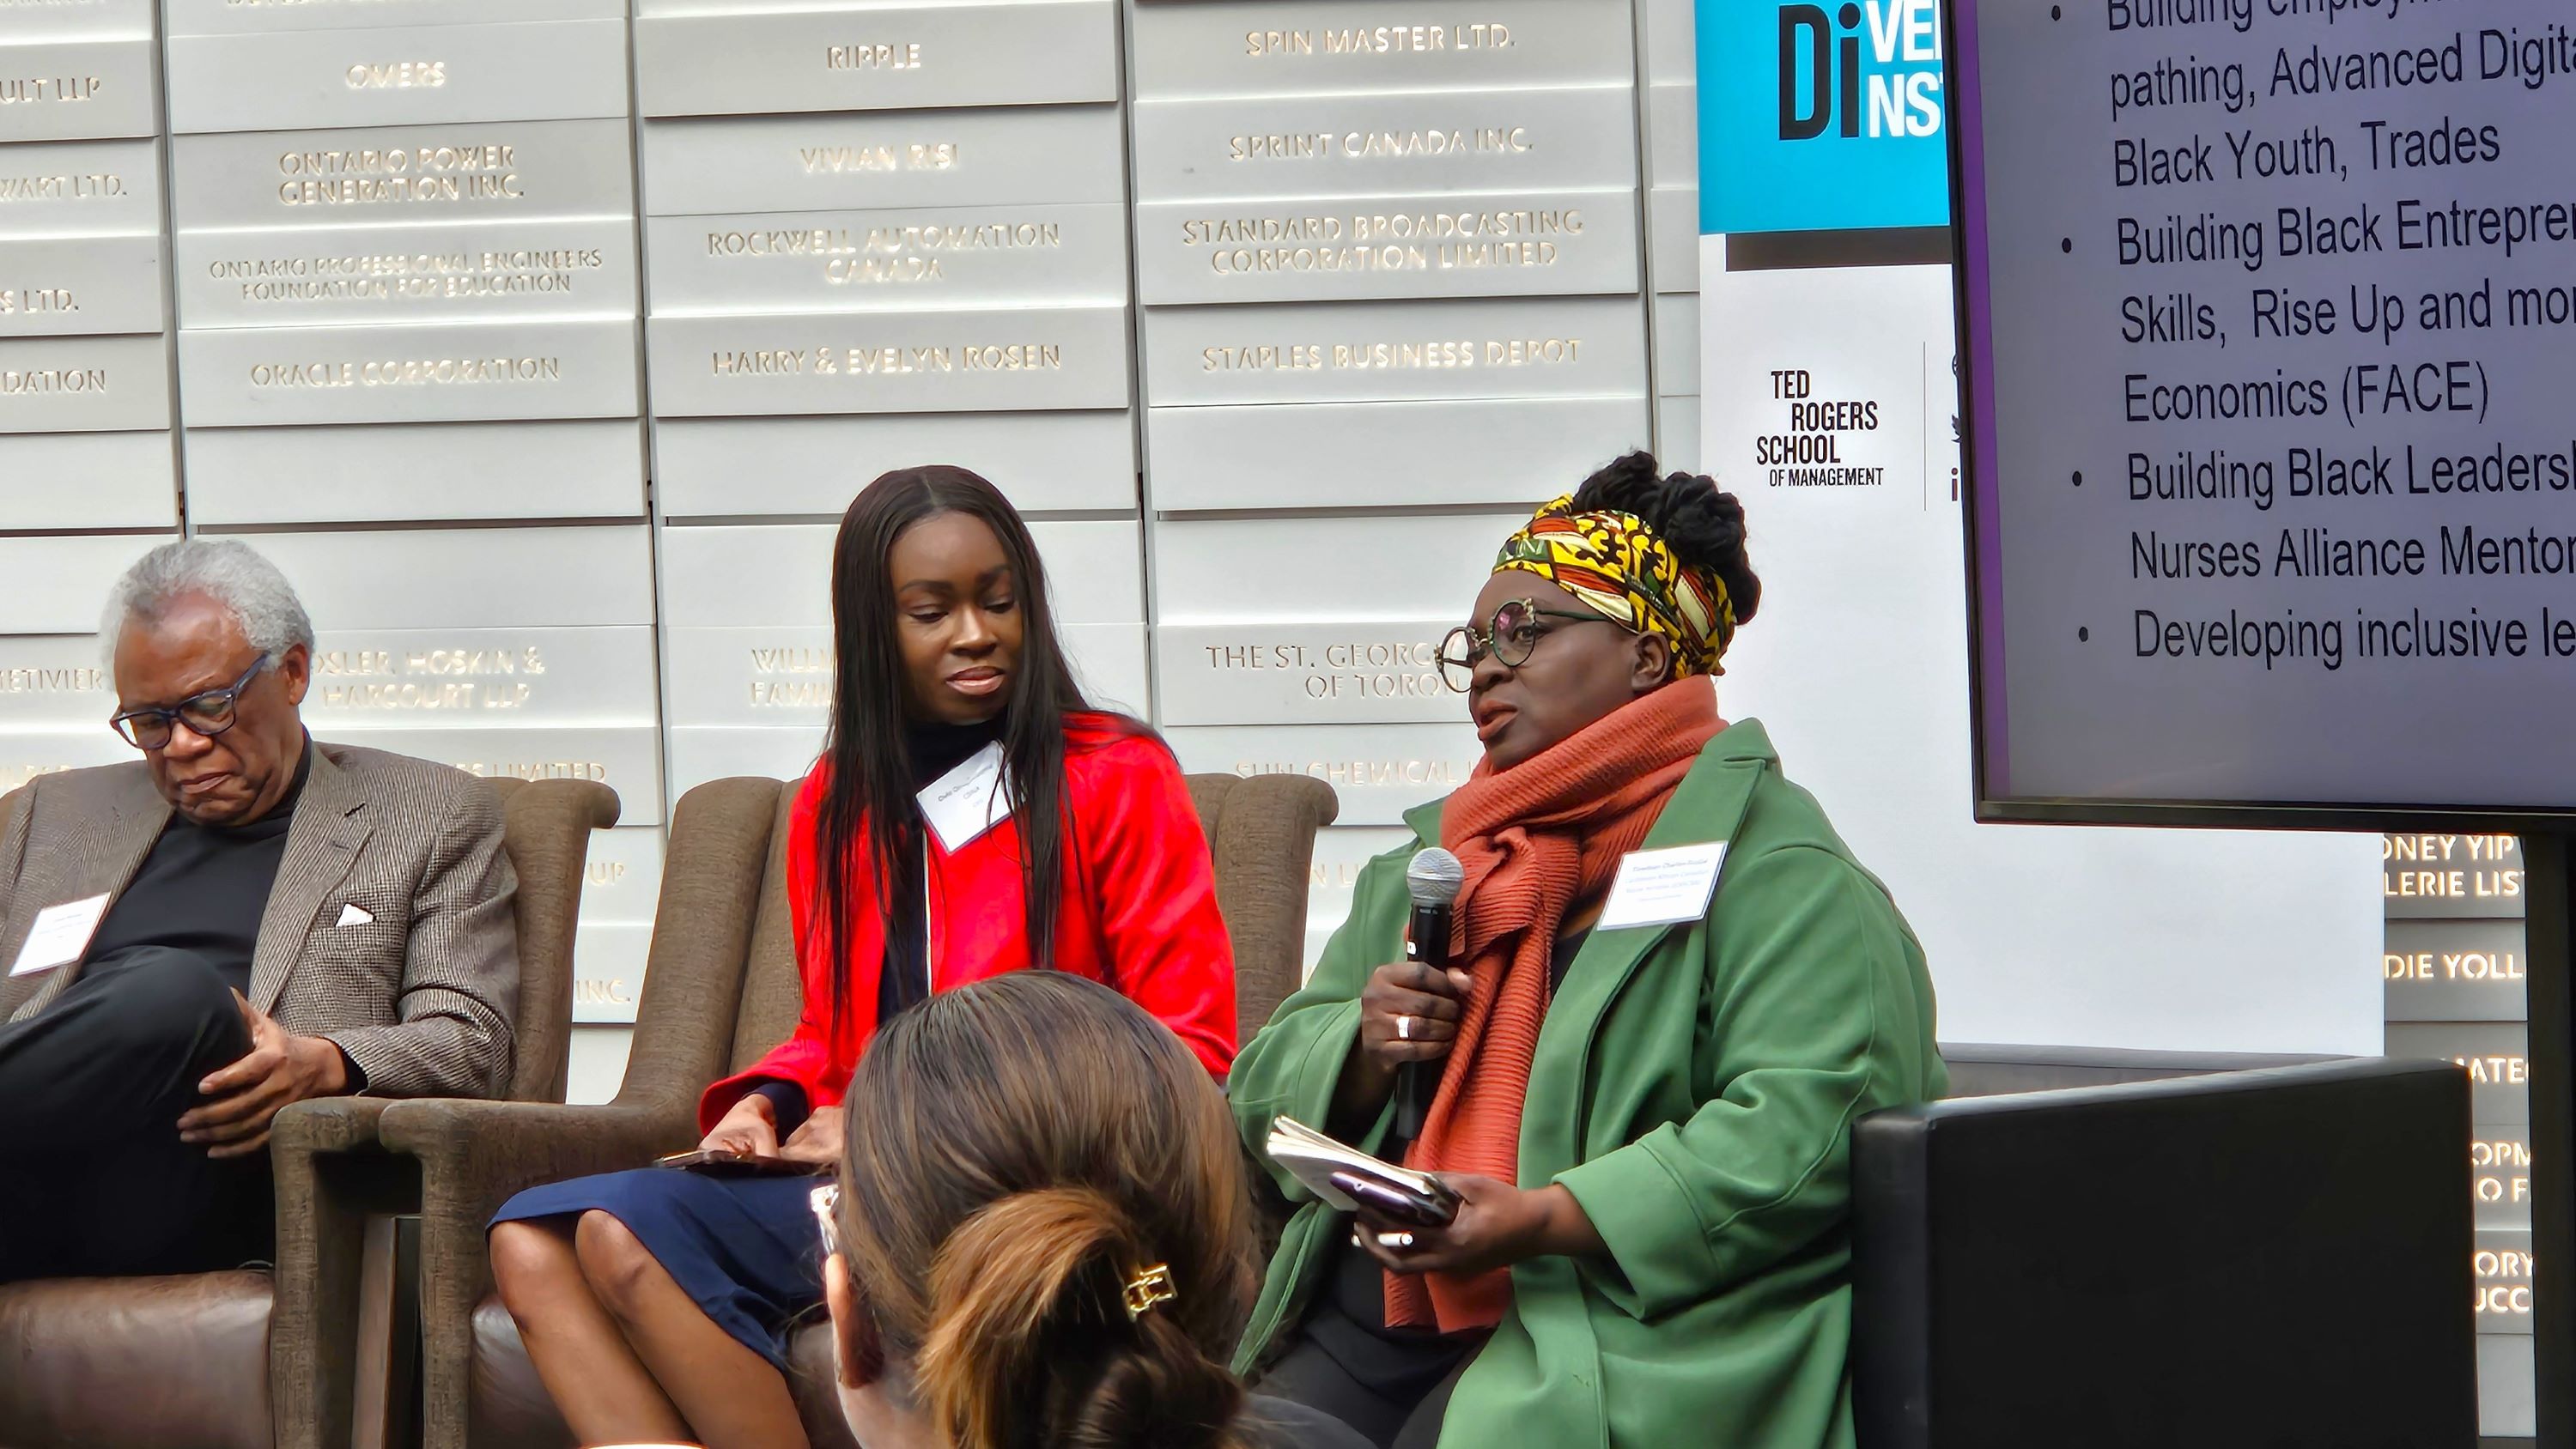 Three Black panelists, one man and two women, sitting on stage, with one of the women speaking into a microphone.